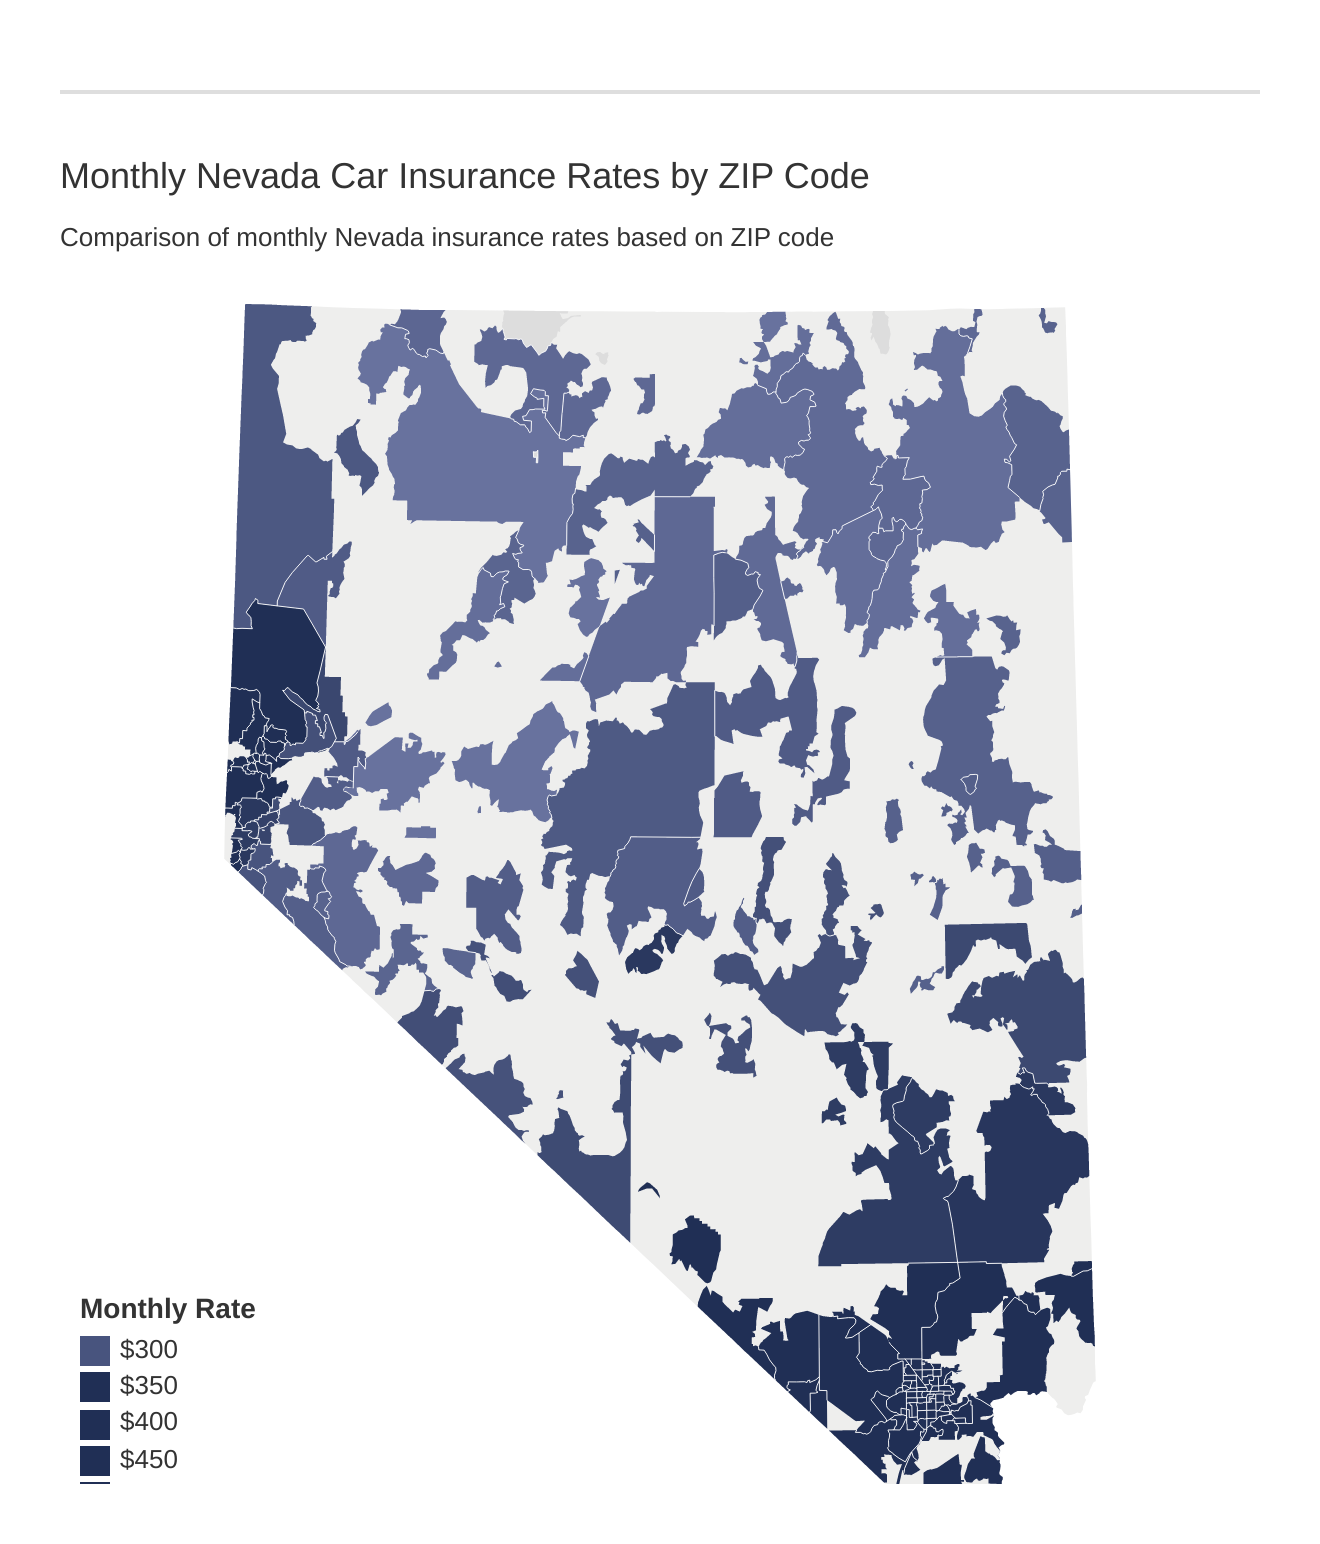 Monthly Nevada Car Insurance Rates by ZIP Code